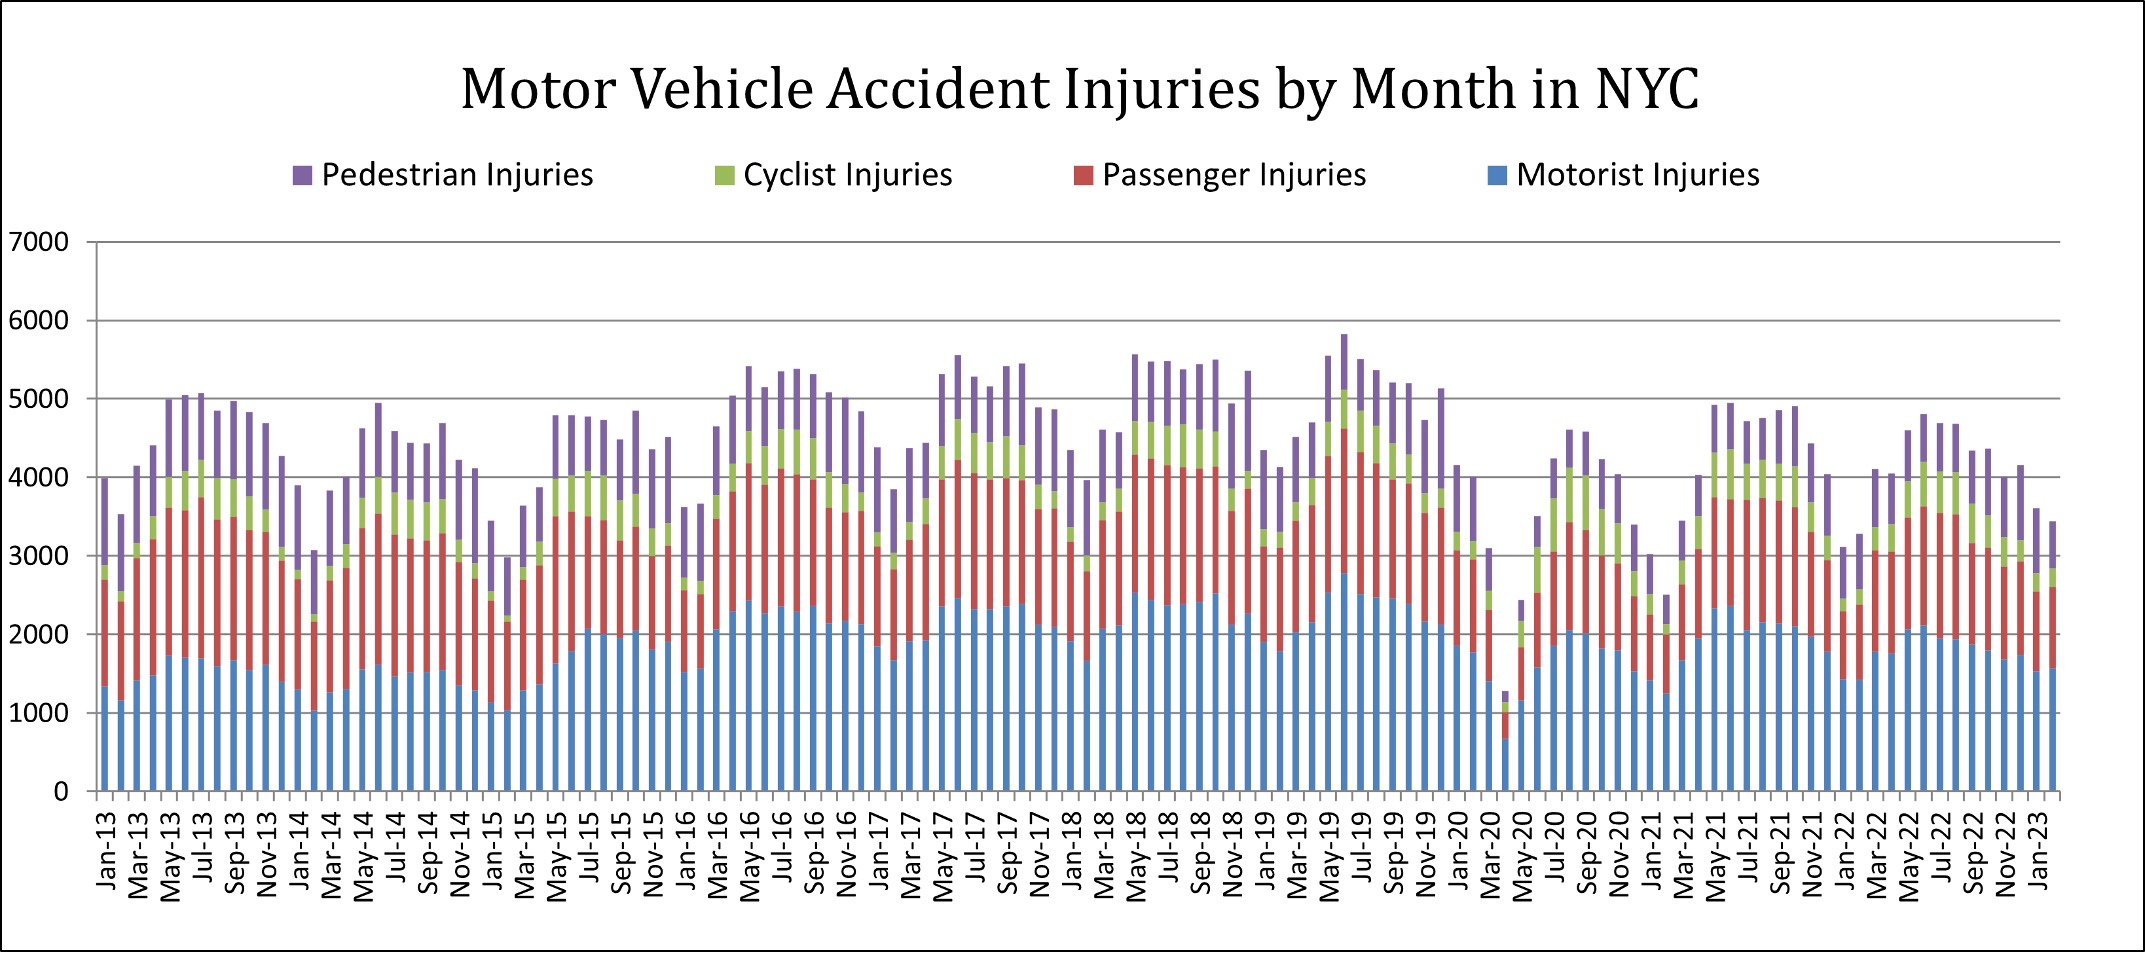 Motor Vehicle Accident Injuries in NYC by Month with Trendline